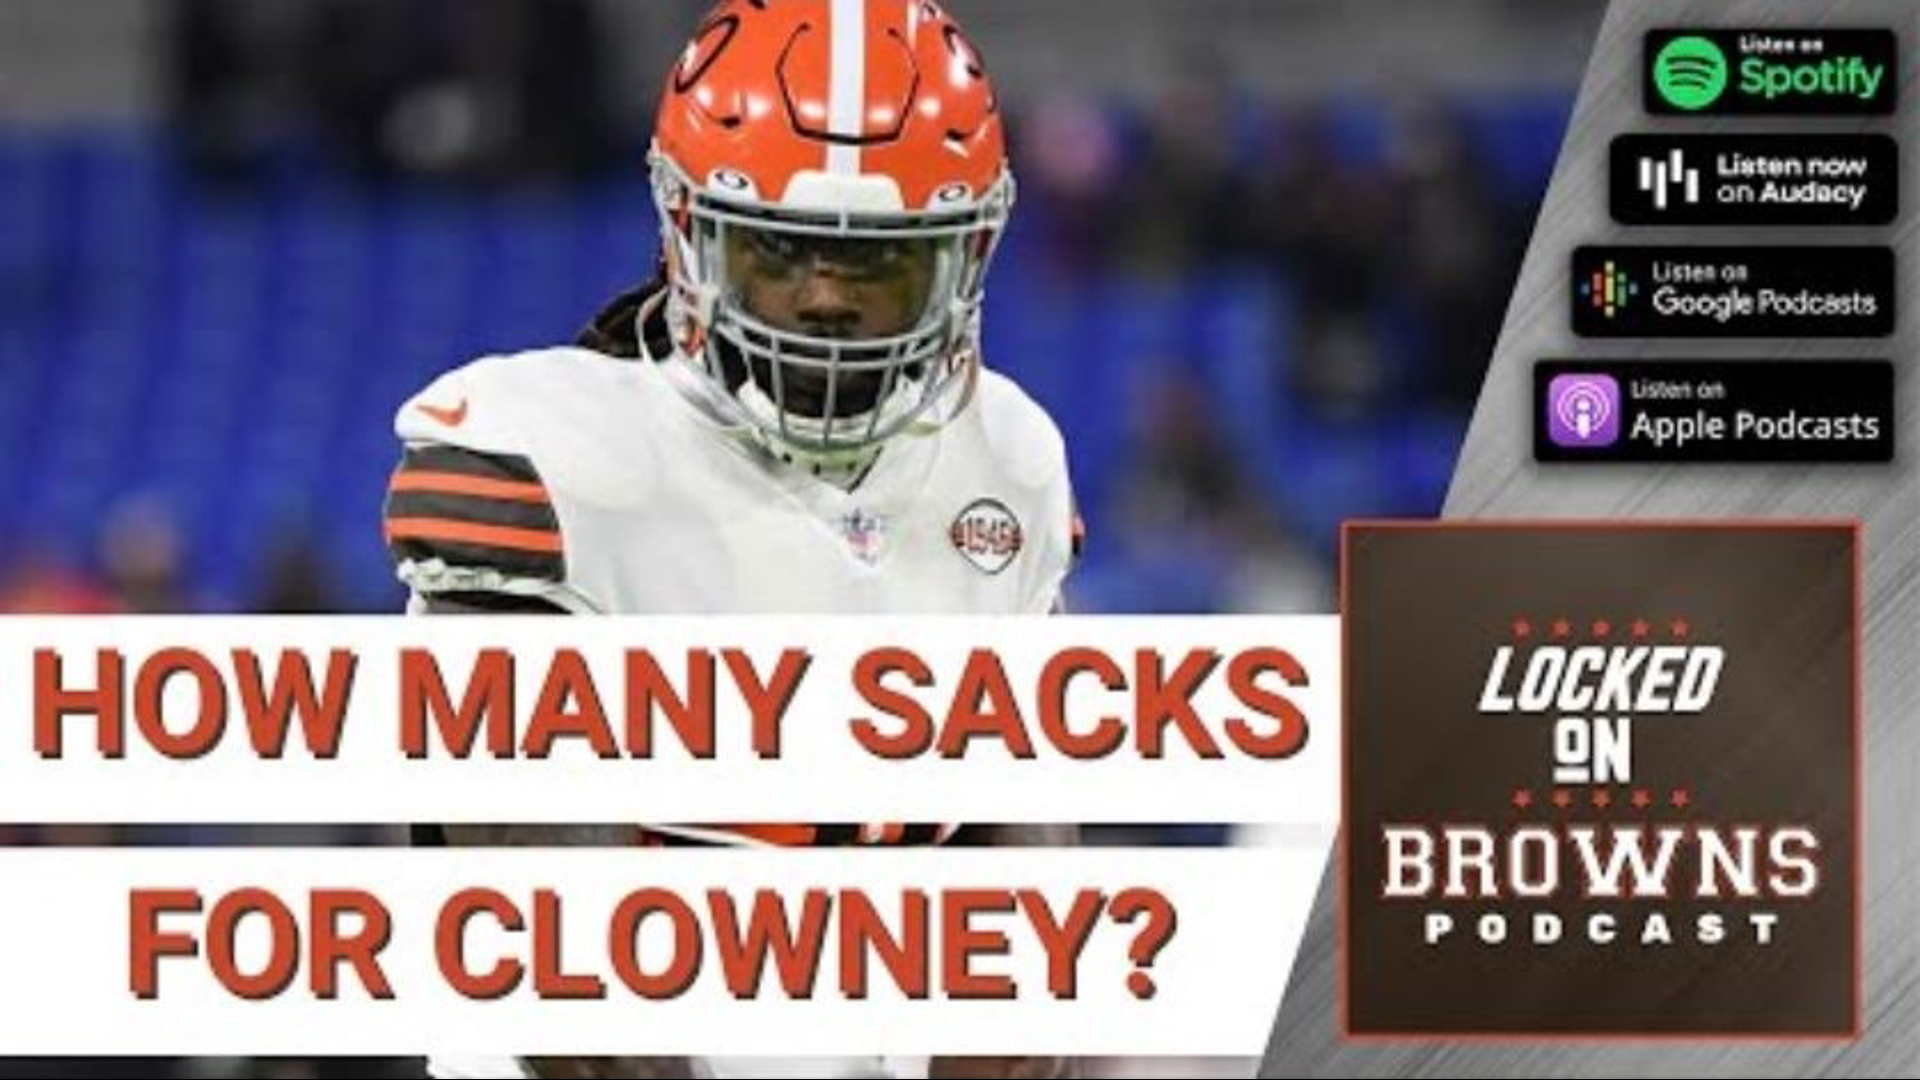 The Browns ranked fifth in the league in total defense a year ago, and Clowney became a destructive force once the group clicked in the second half of the season.